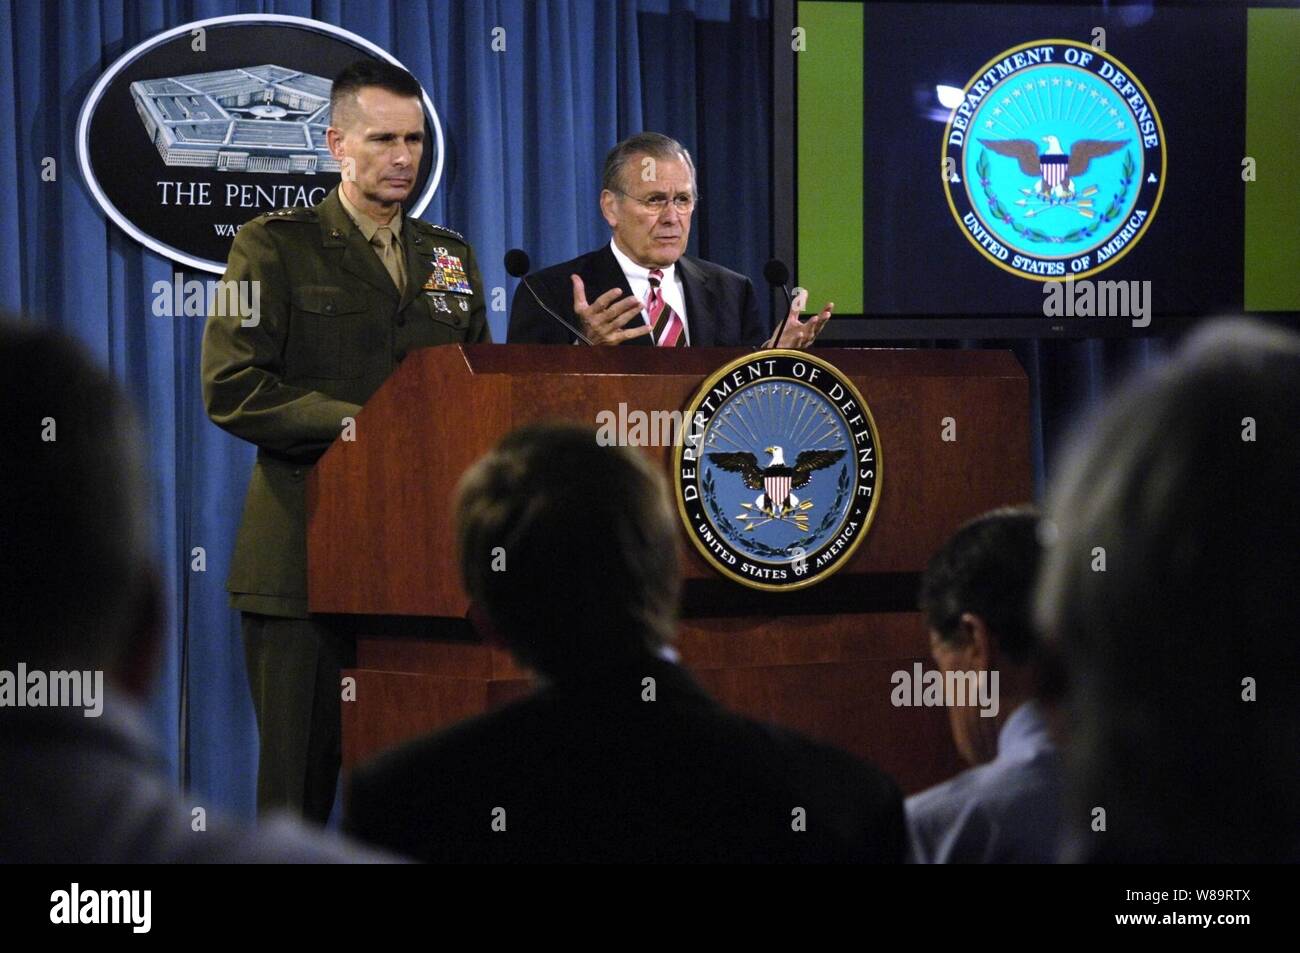 Secretary of Defense Donald H. Rumsfeld gestures to make a point as he answers a reporter's question during a Pentagon press briefing with Chairman of the Joint Chiefs of Staff Gen. Peter Pace, U.S. Marine Corps, in Arlington, Va., on March 28, 2006. Rumsfeld spoke of his trip to the crash site of United Flight 93 on Sept. 11, 2001, in Shanksville, Pa., in his opening remarks before he and Pace took questions from reporters. Stock Photo